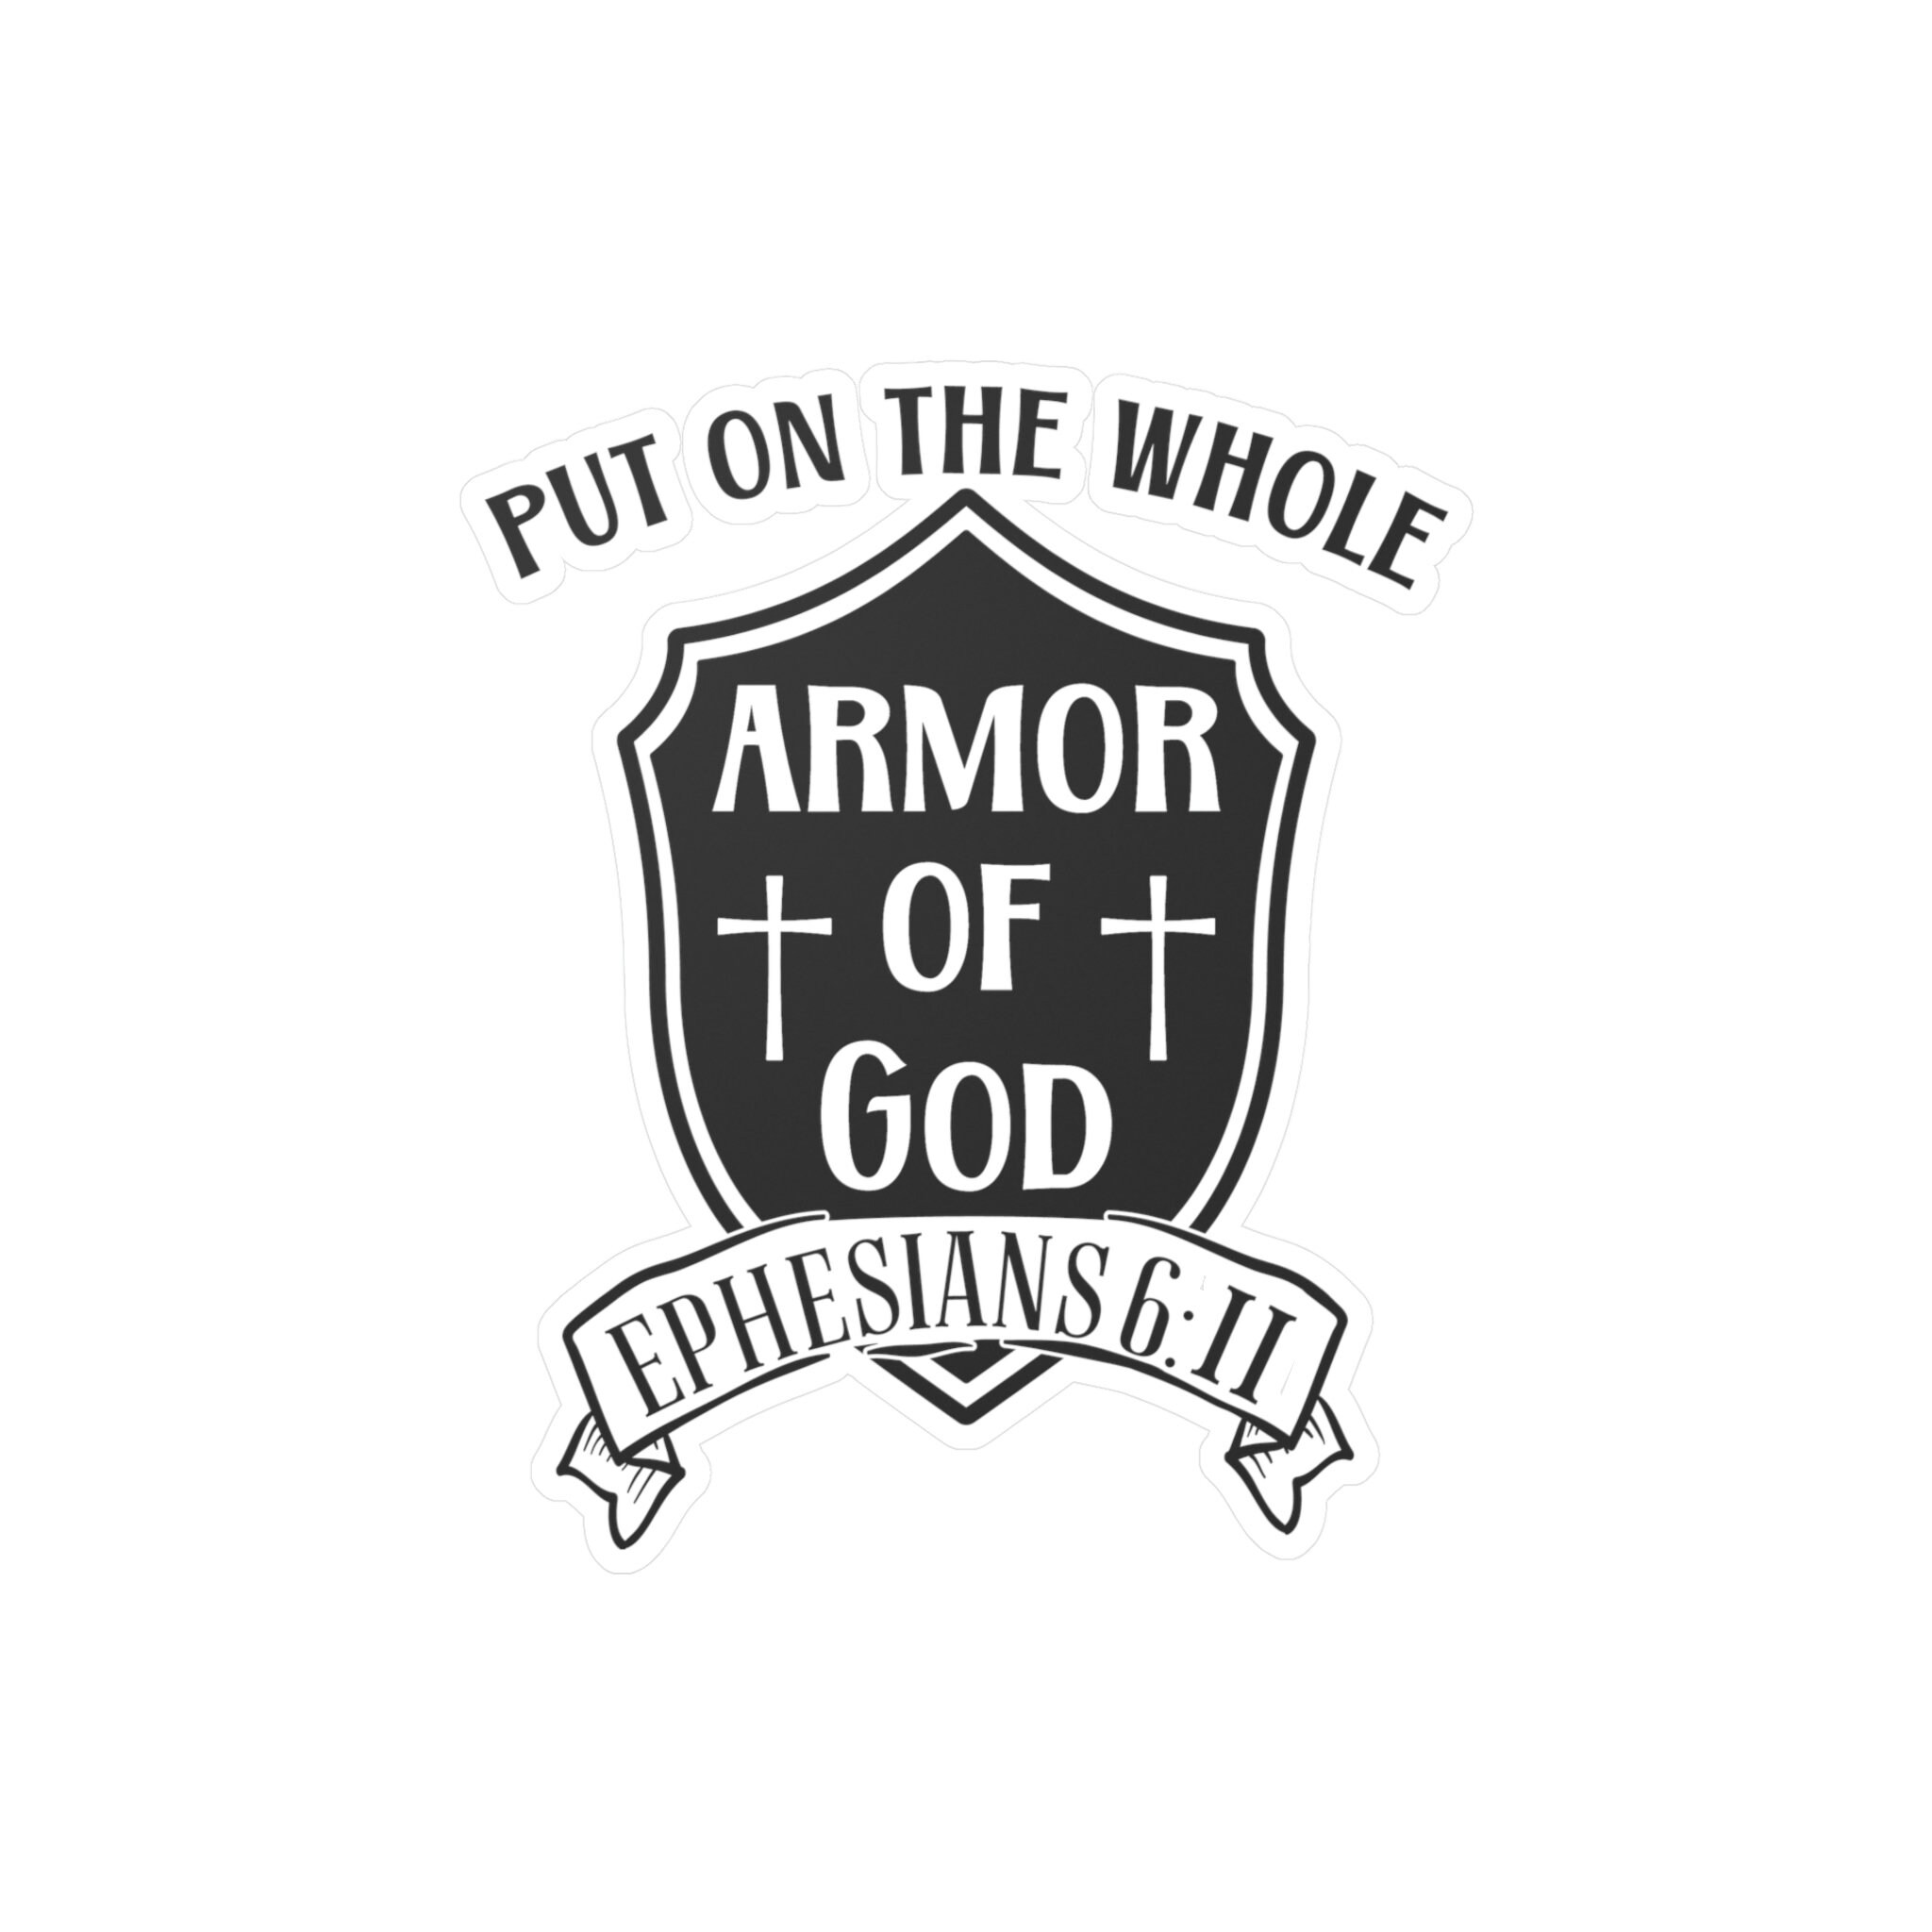 10 Armor of God Charm Sets of 6 Pieces Ephesians 6:11 Be Strong in